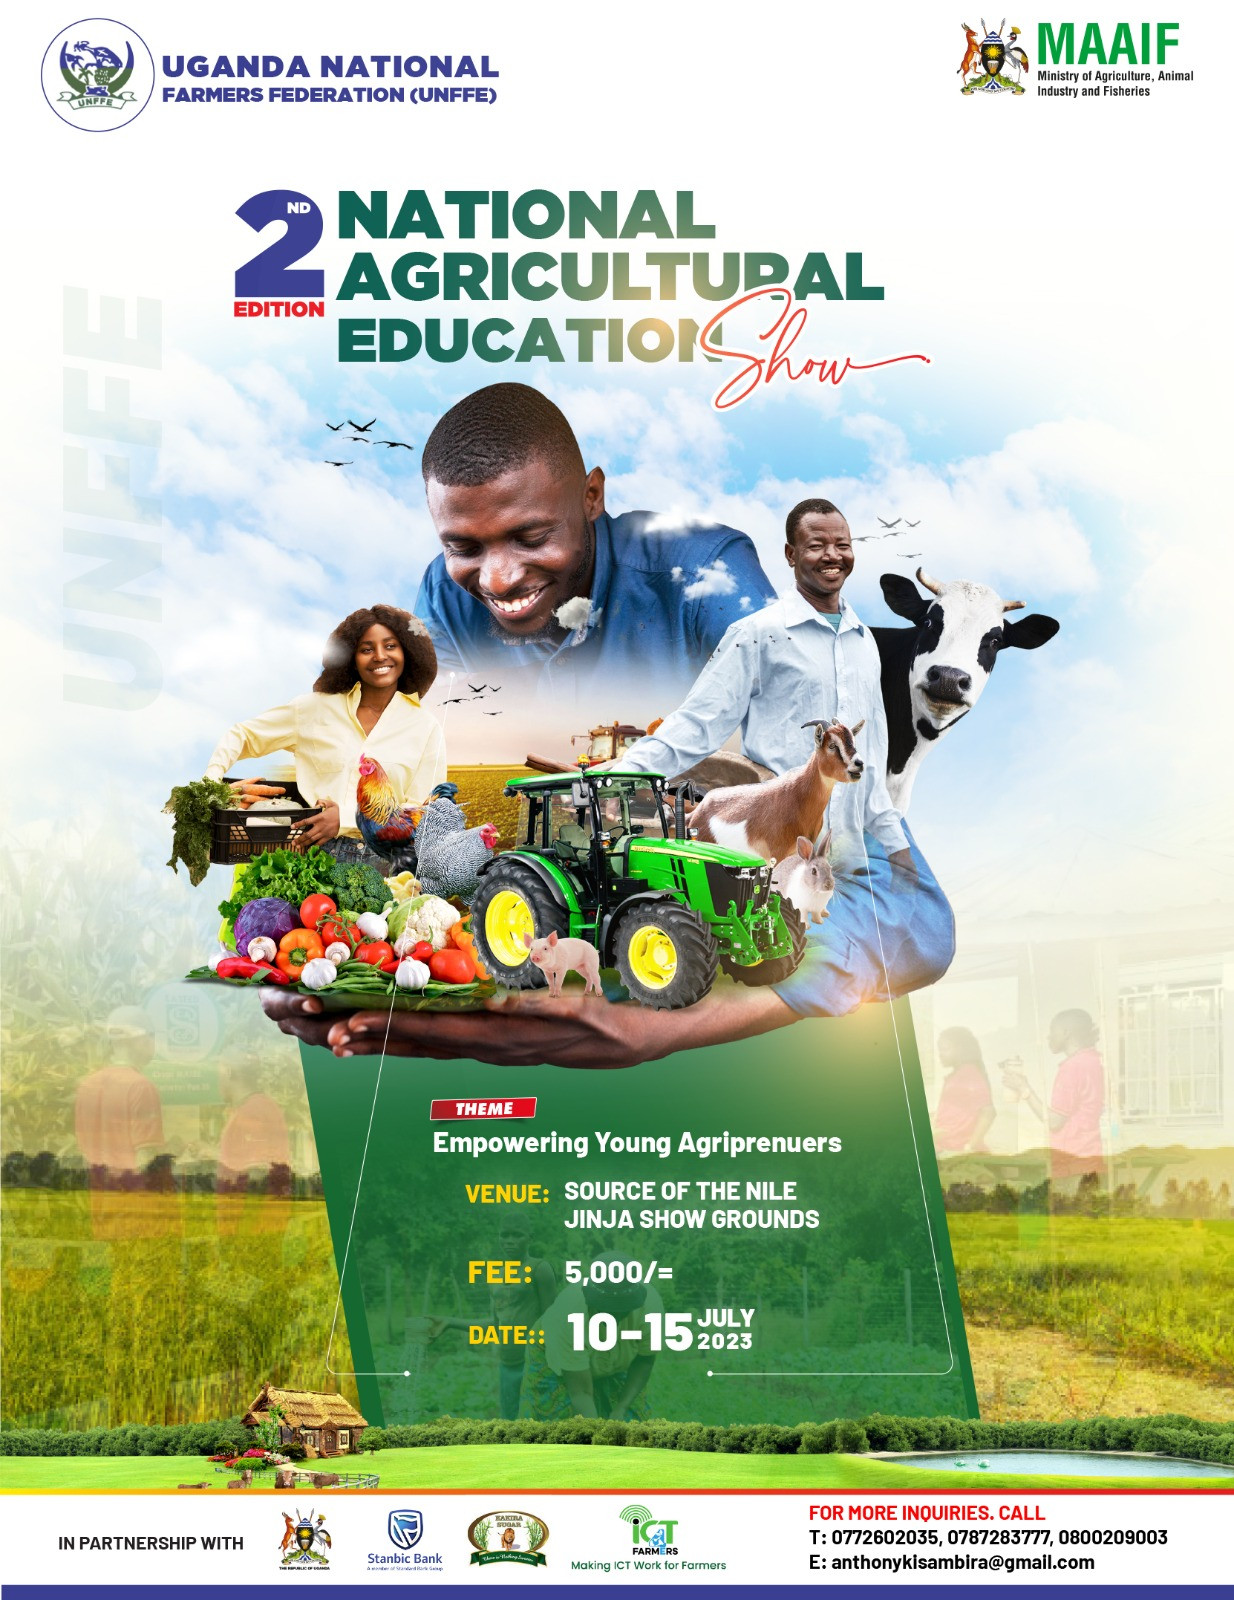 The 2nd National Agricultural Education - Source of the Nile Jinja Show Grounds